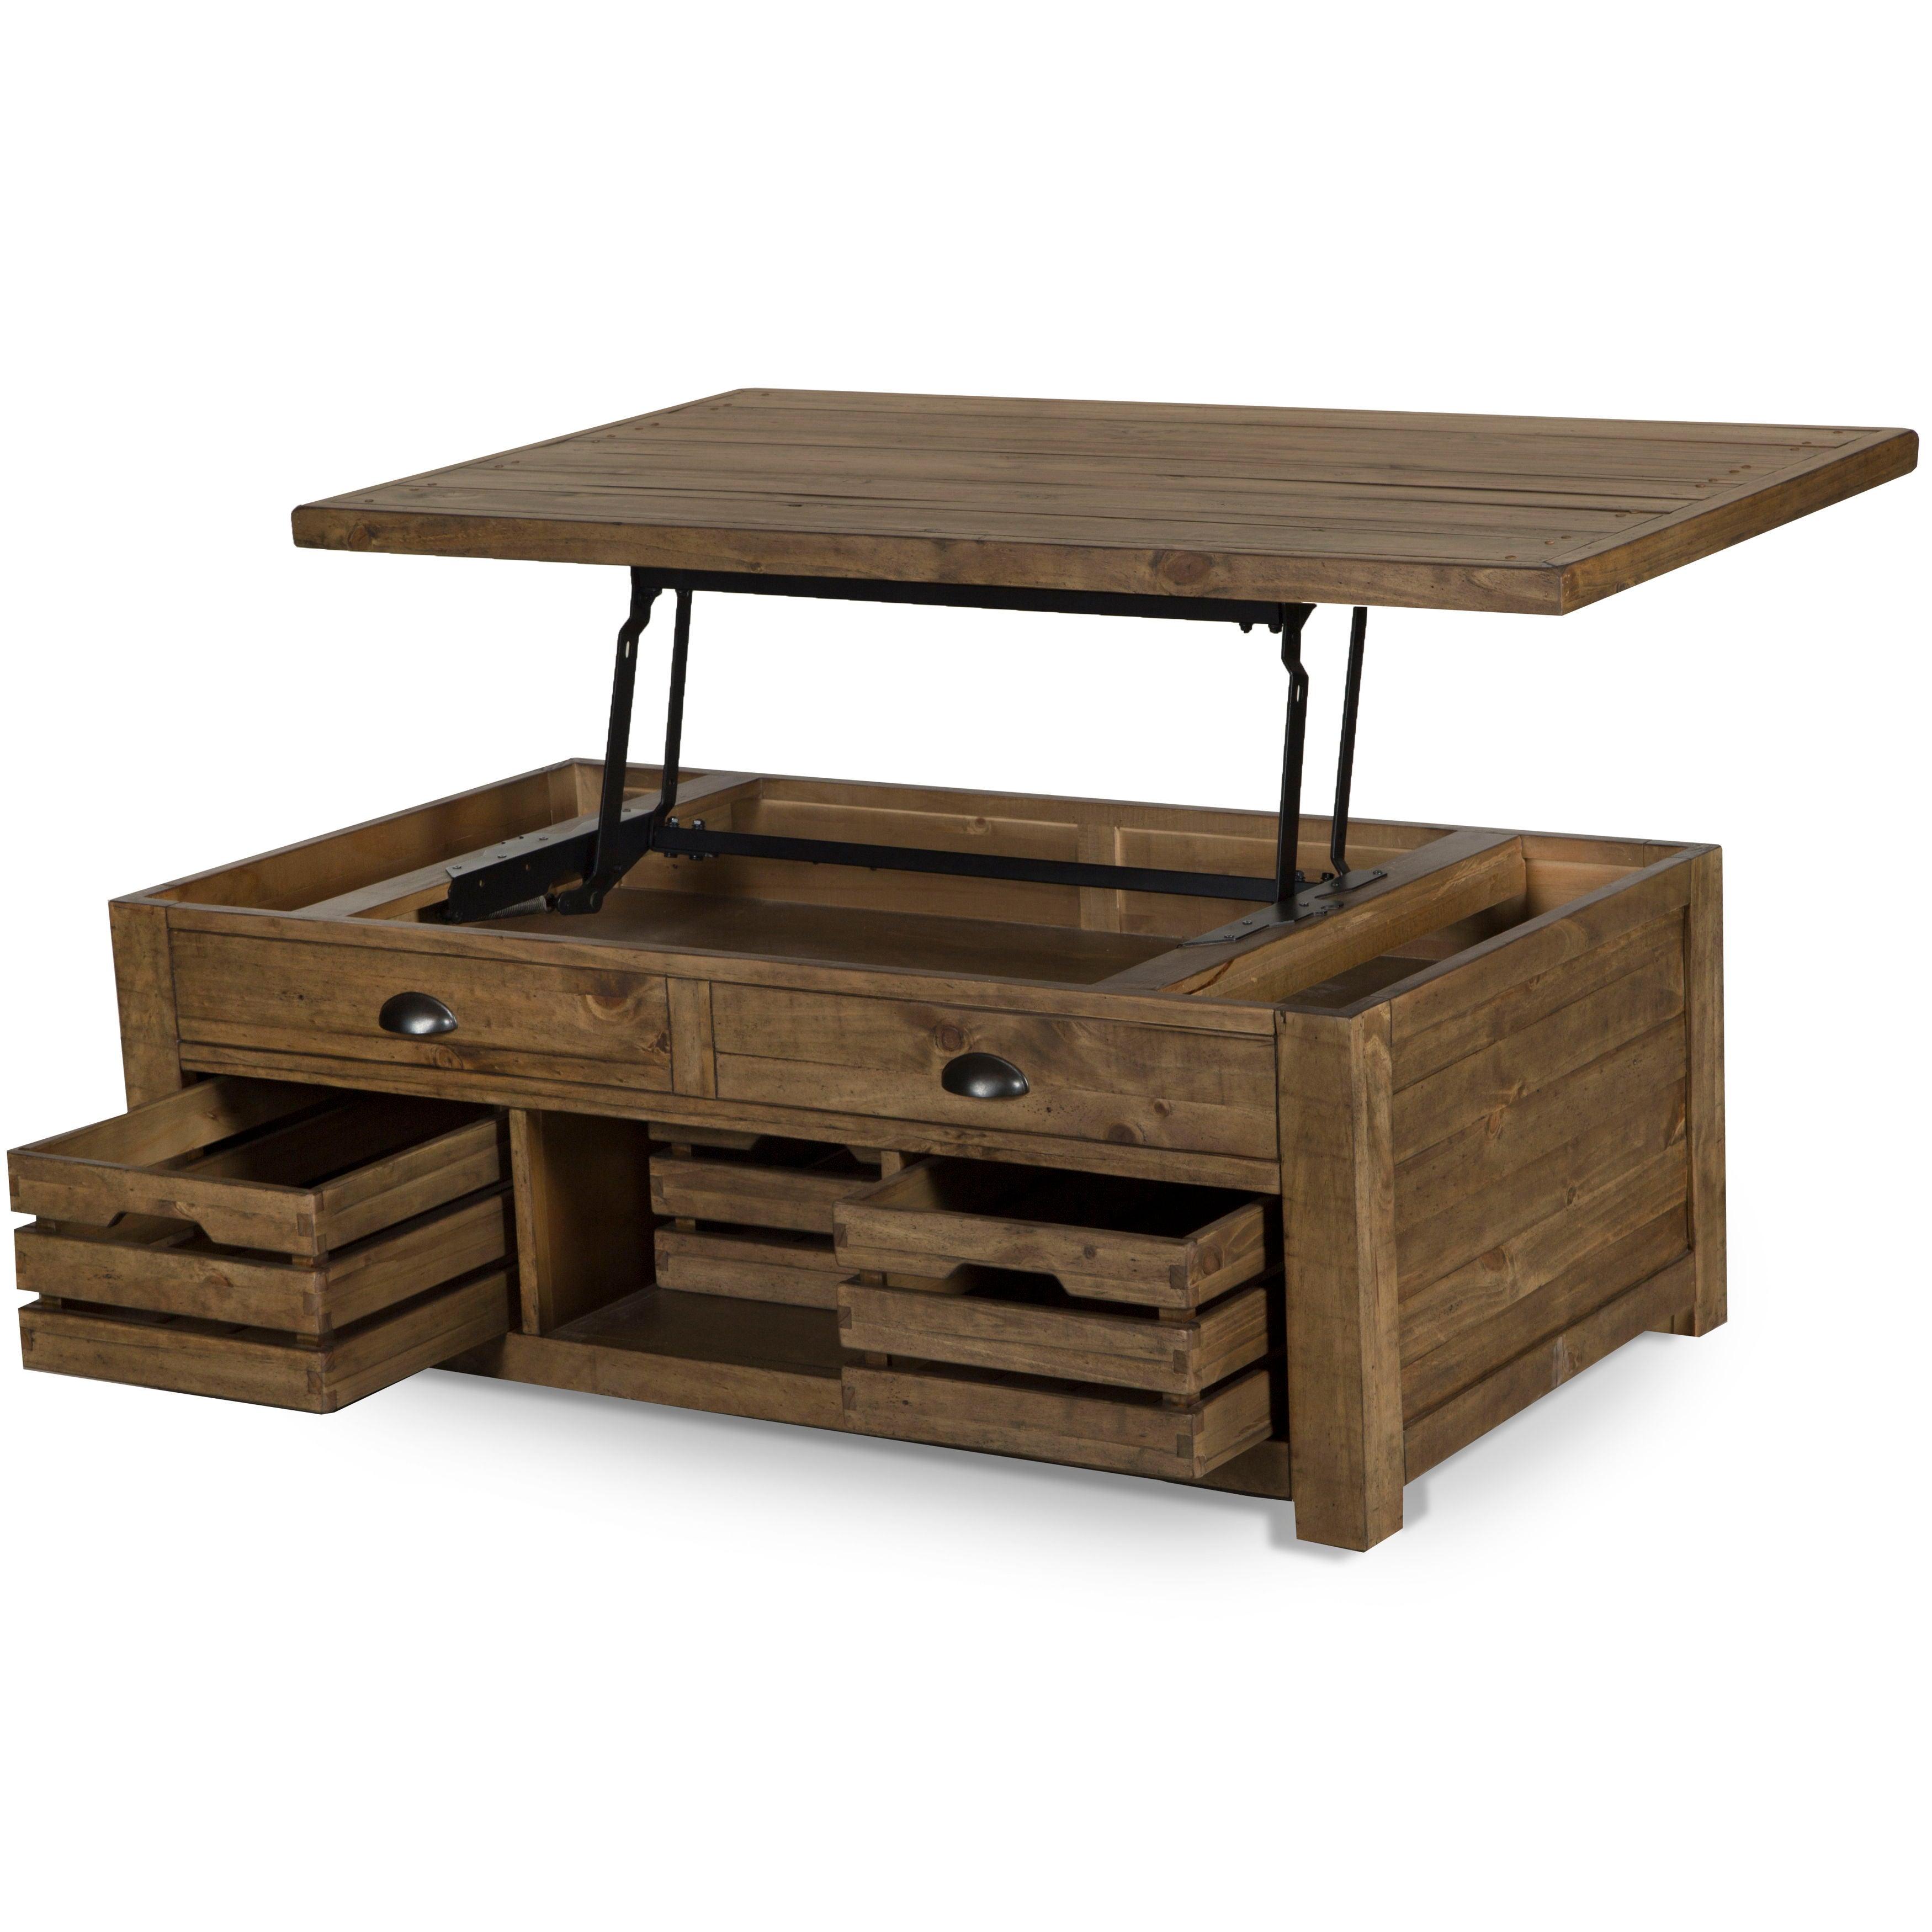 Magnussen Furniture - Stratton - Lift Top Storage Cocktail Table (With Casters) - Warm Nutmeg - 5th Avenue Furniture